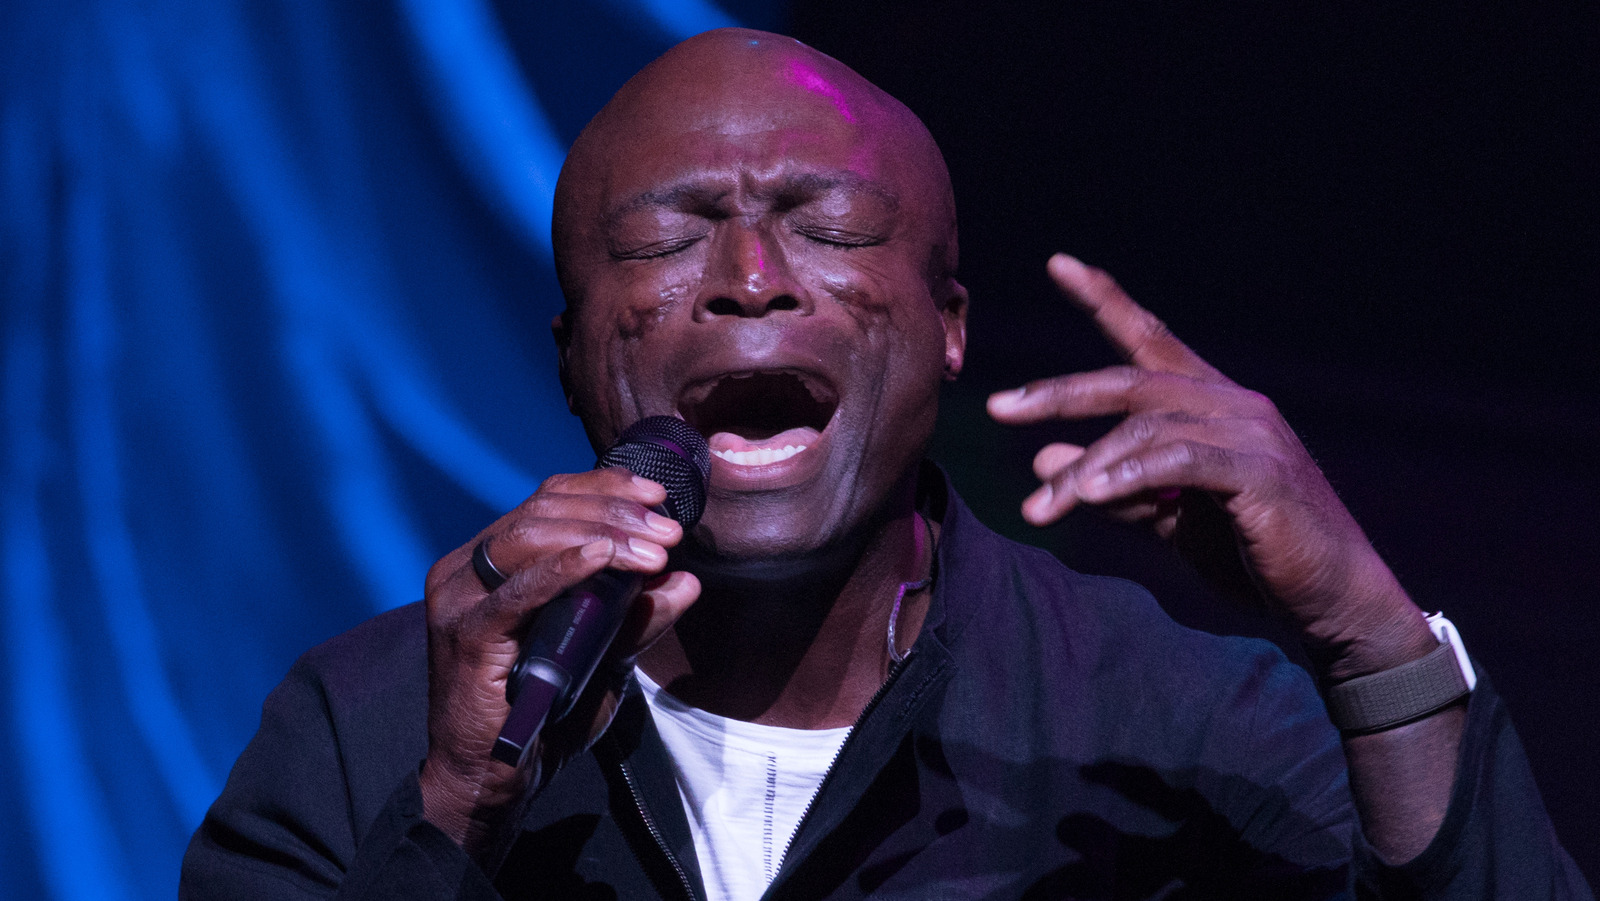 Singer Seal Young